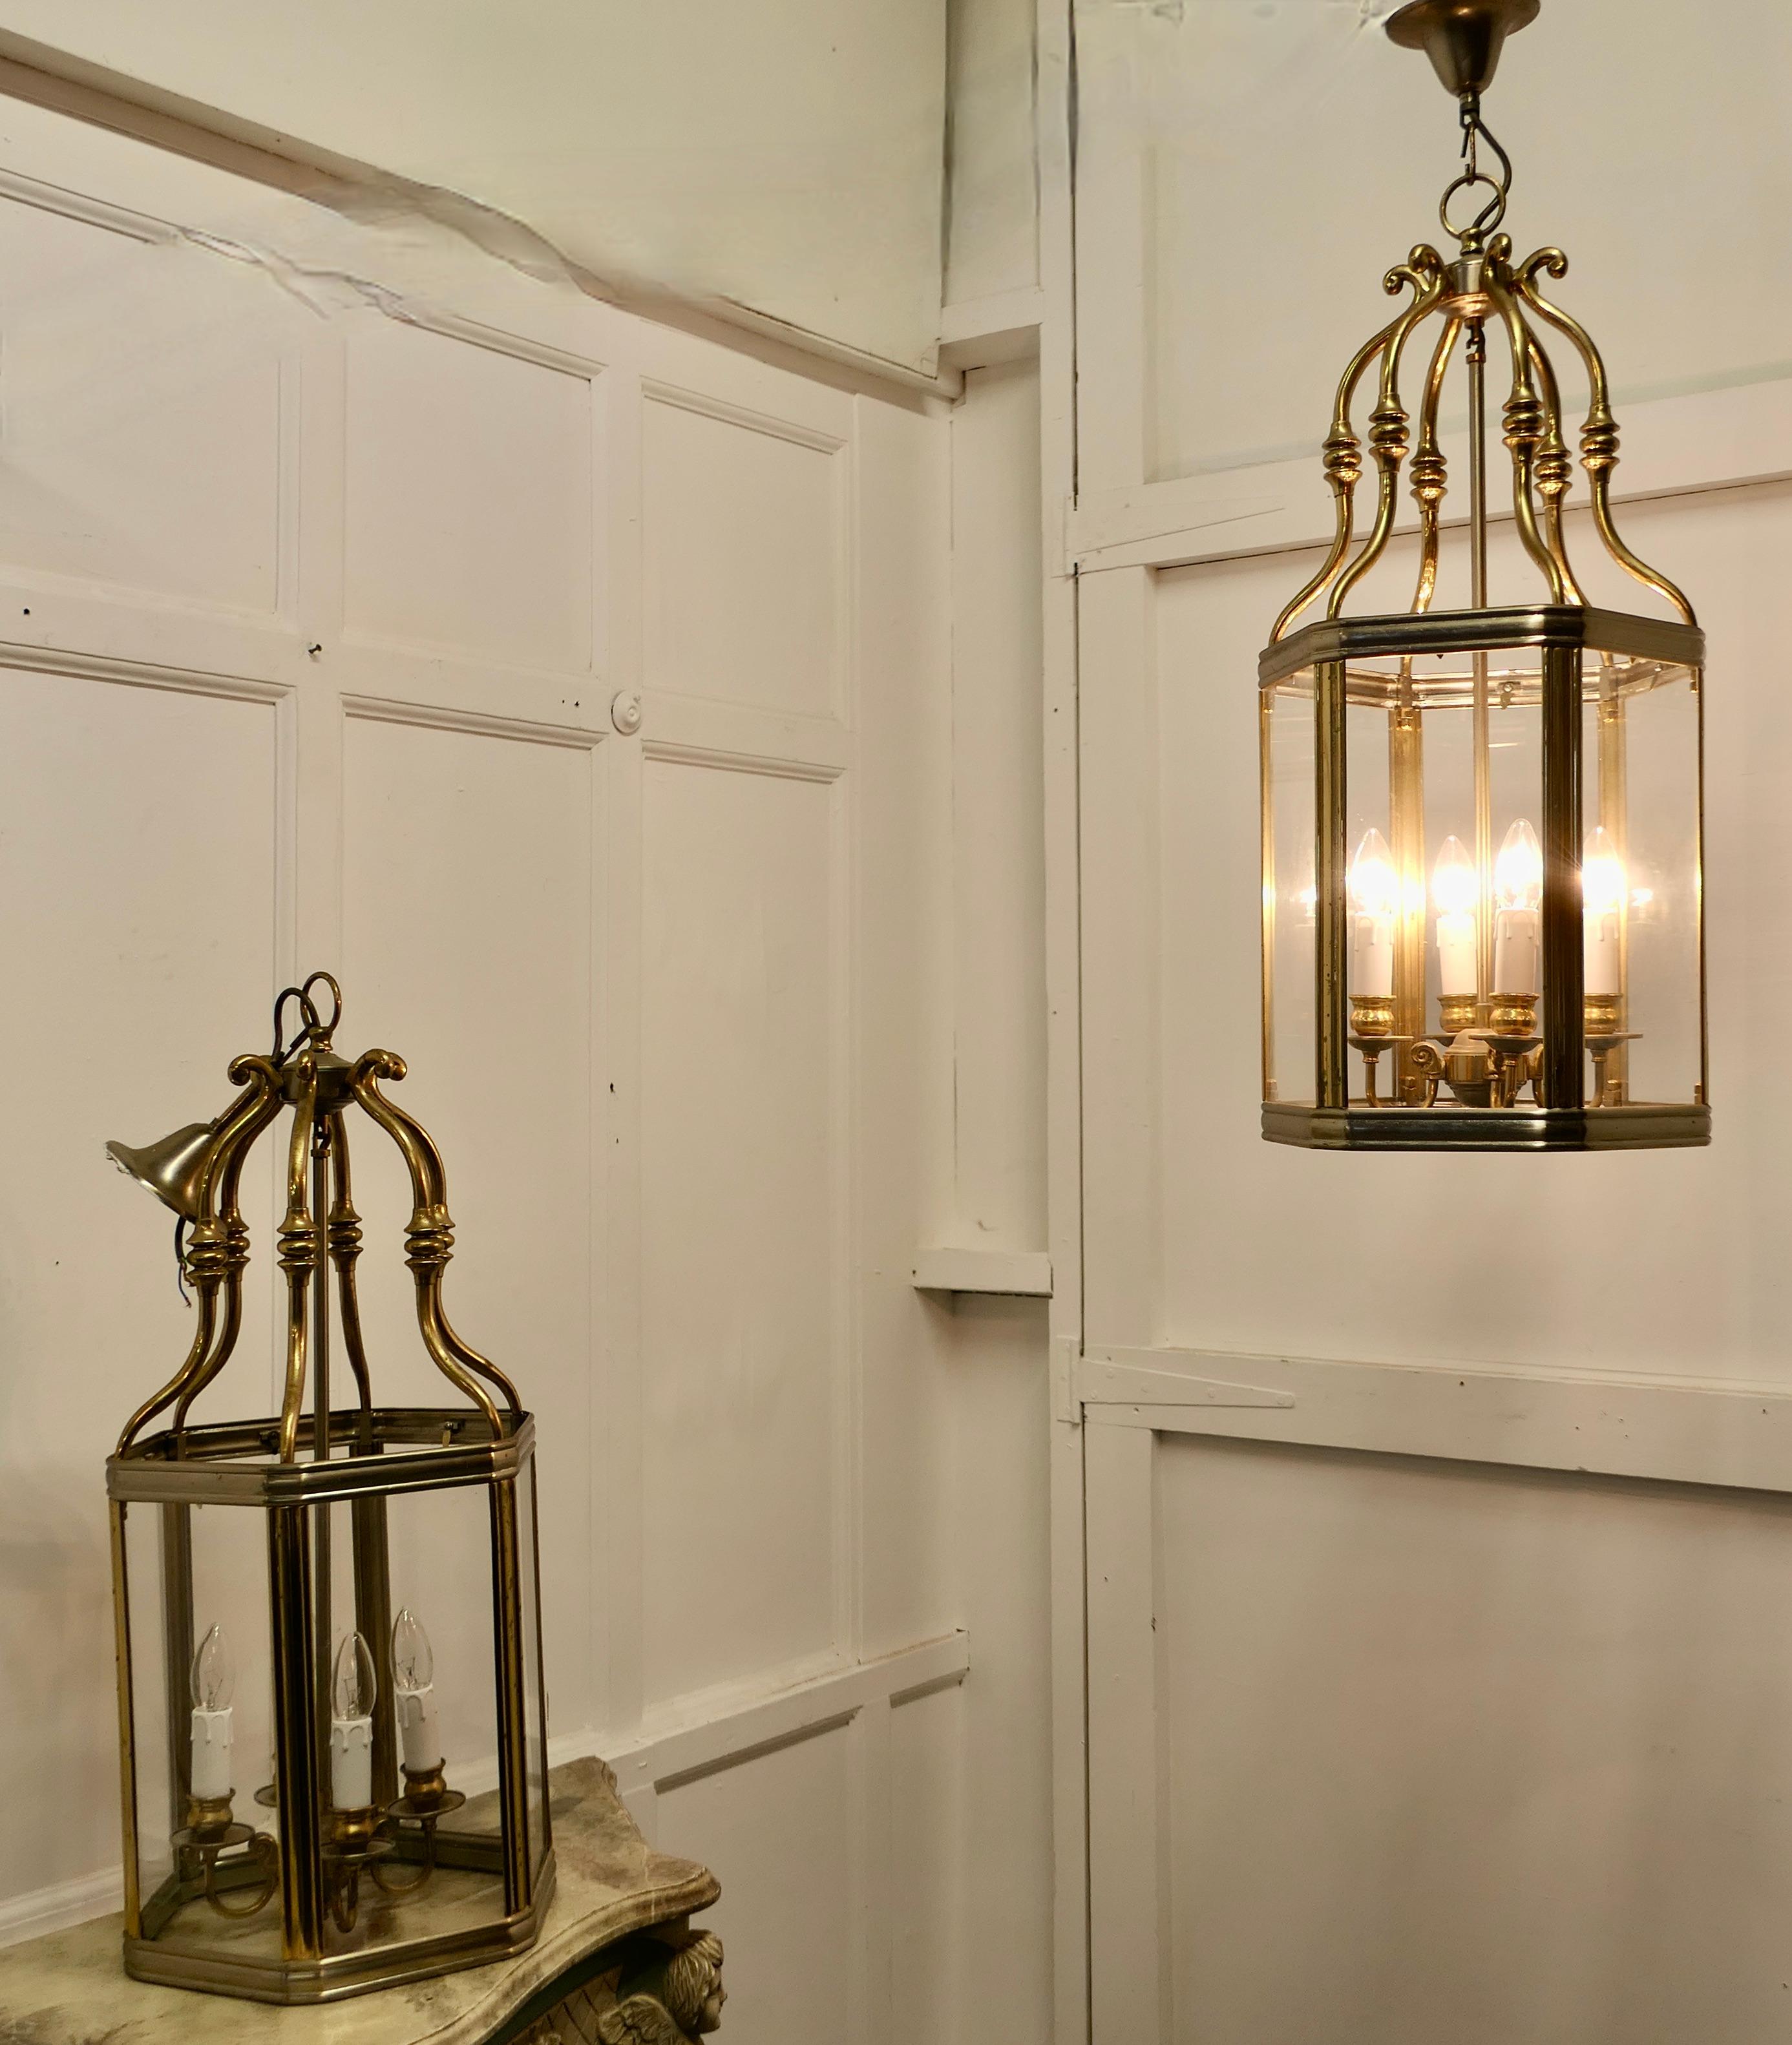 A pair of very large French Art Deco brass & glass hall lanterns

A superb impressive pair of brass lanterns, these have 6 clear glass sides with 4 bulb holders on the inside, they each hang on a brass ceiling rose
The lanterns give a sensational